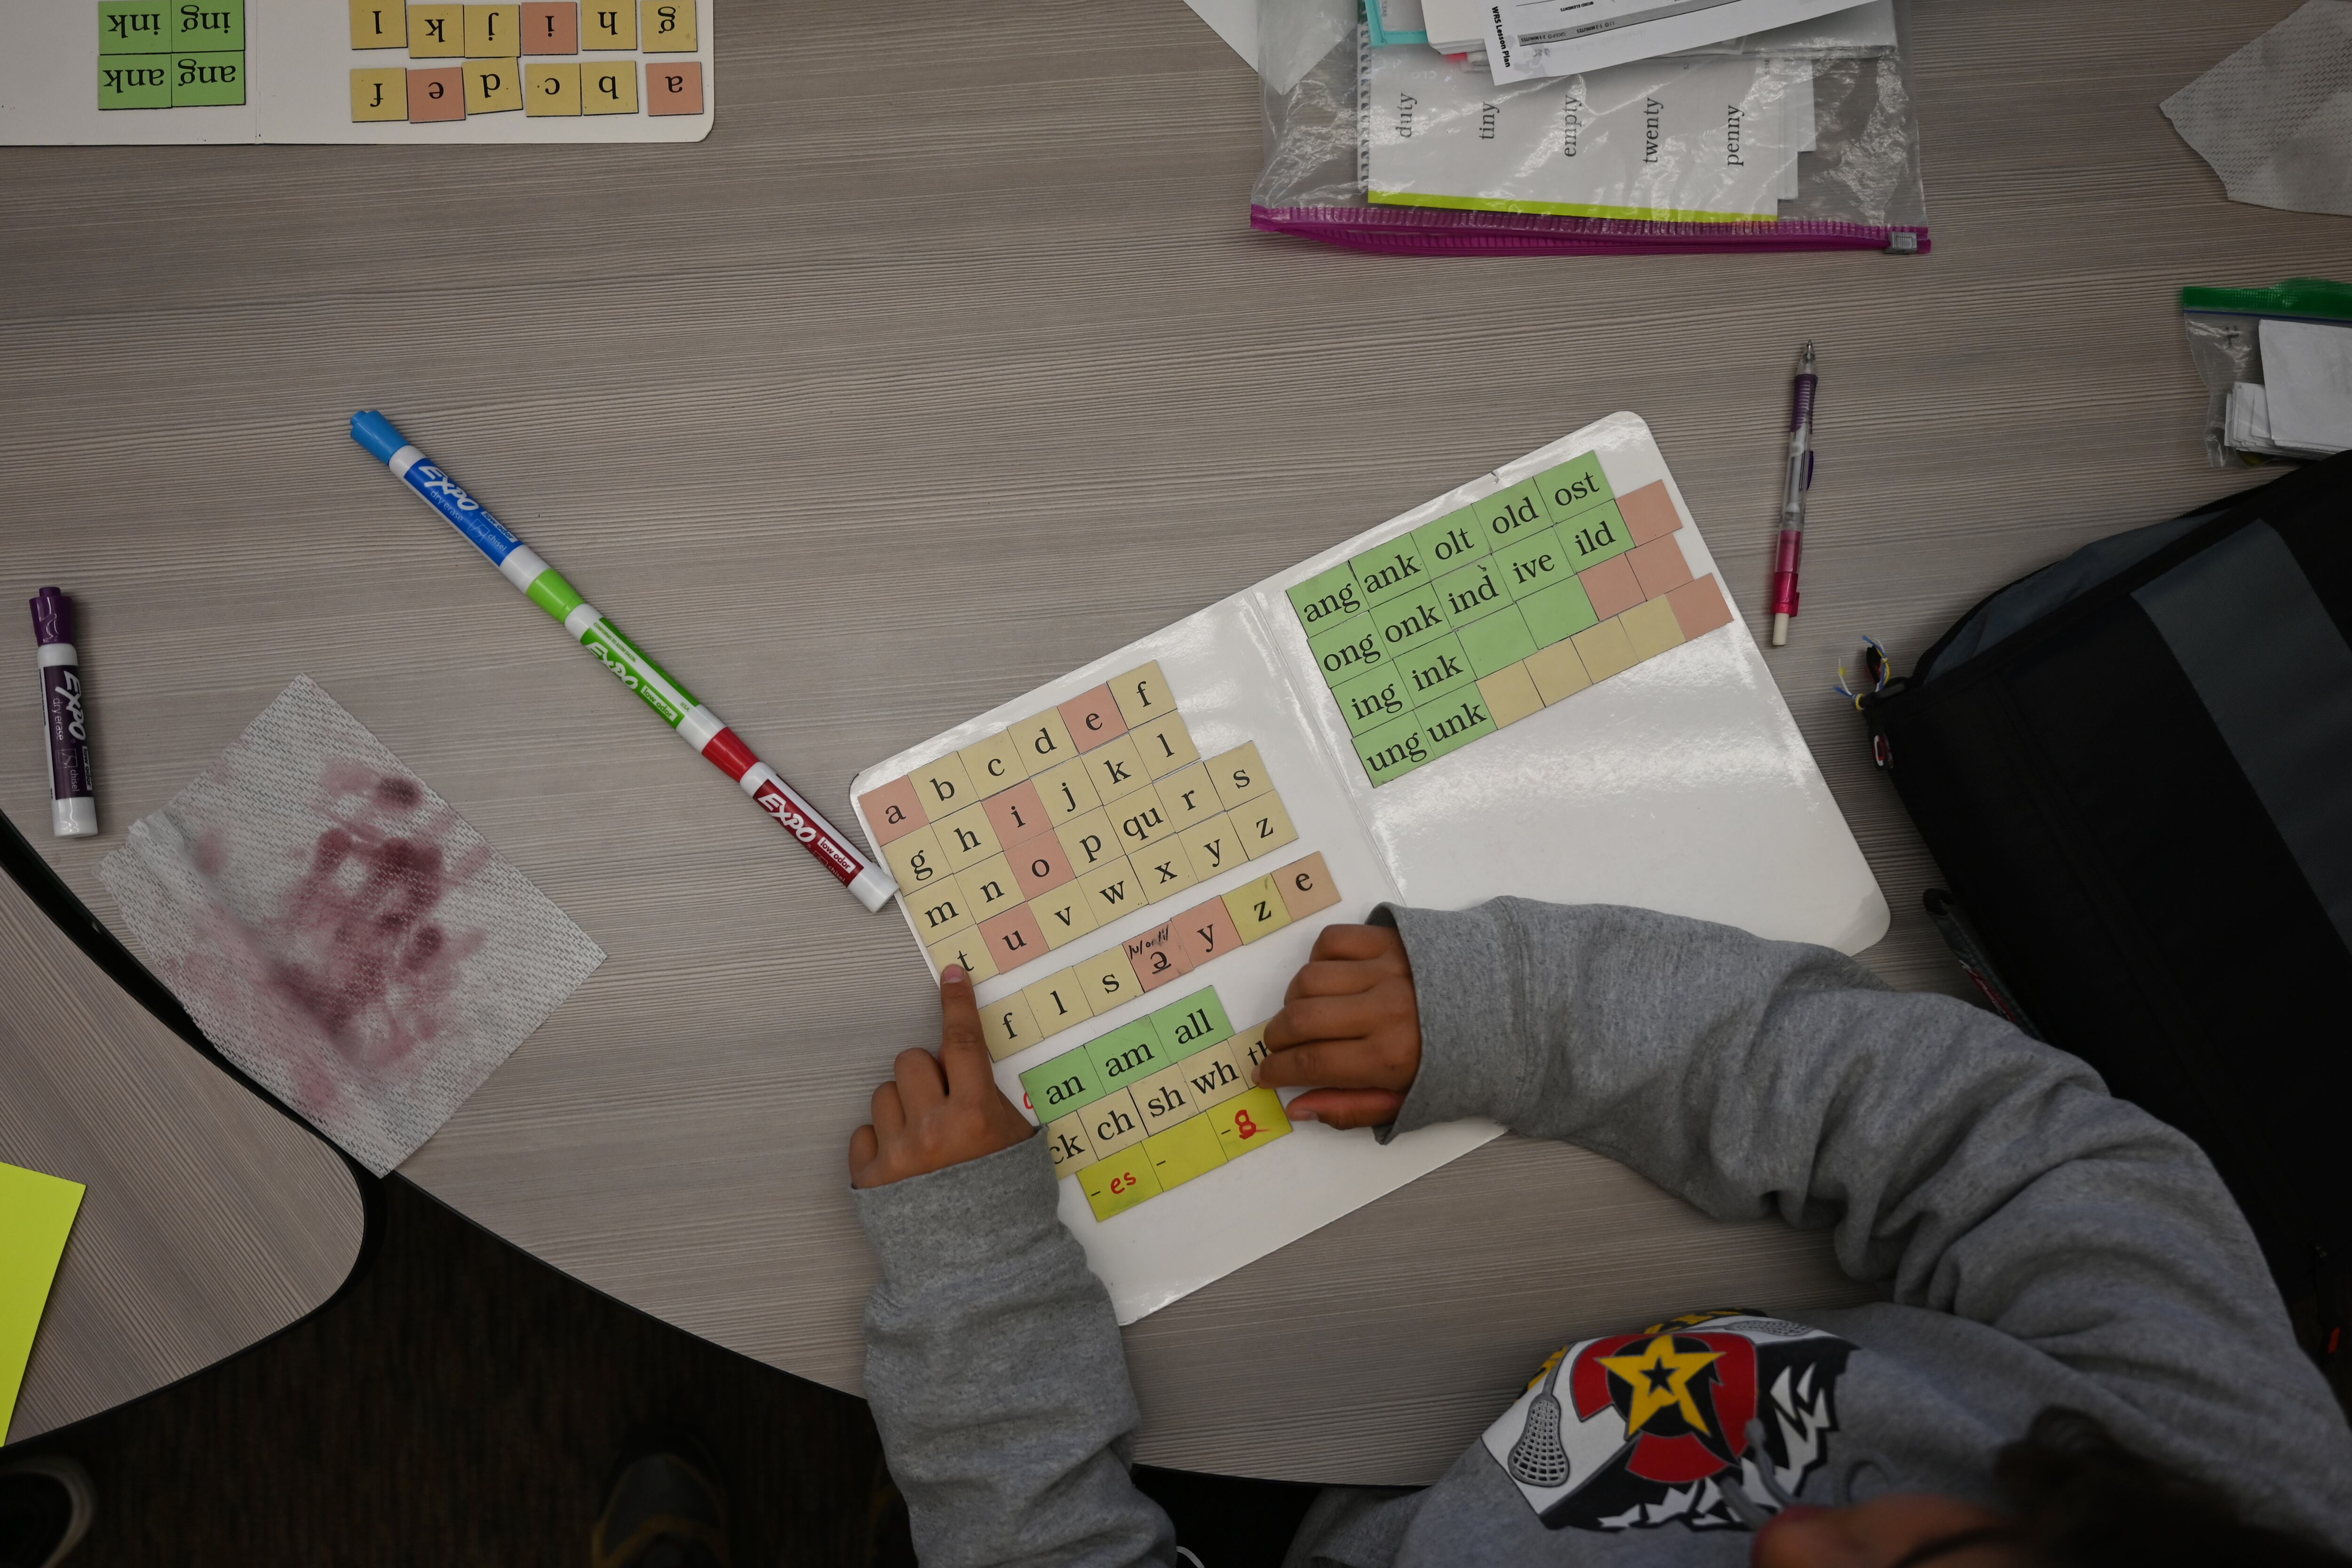 A student works on letter sounds, using a board with magnetic letters at a circular table.